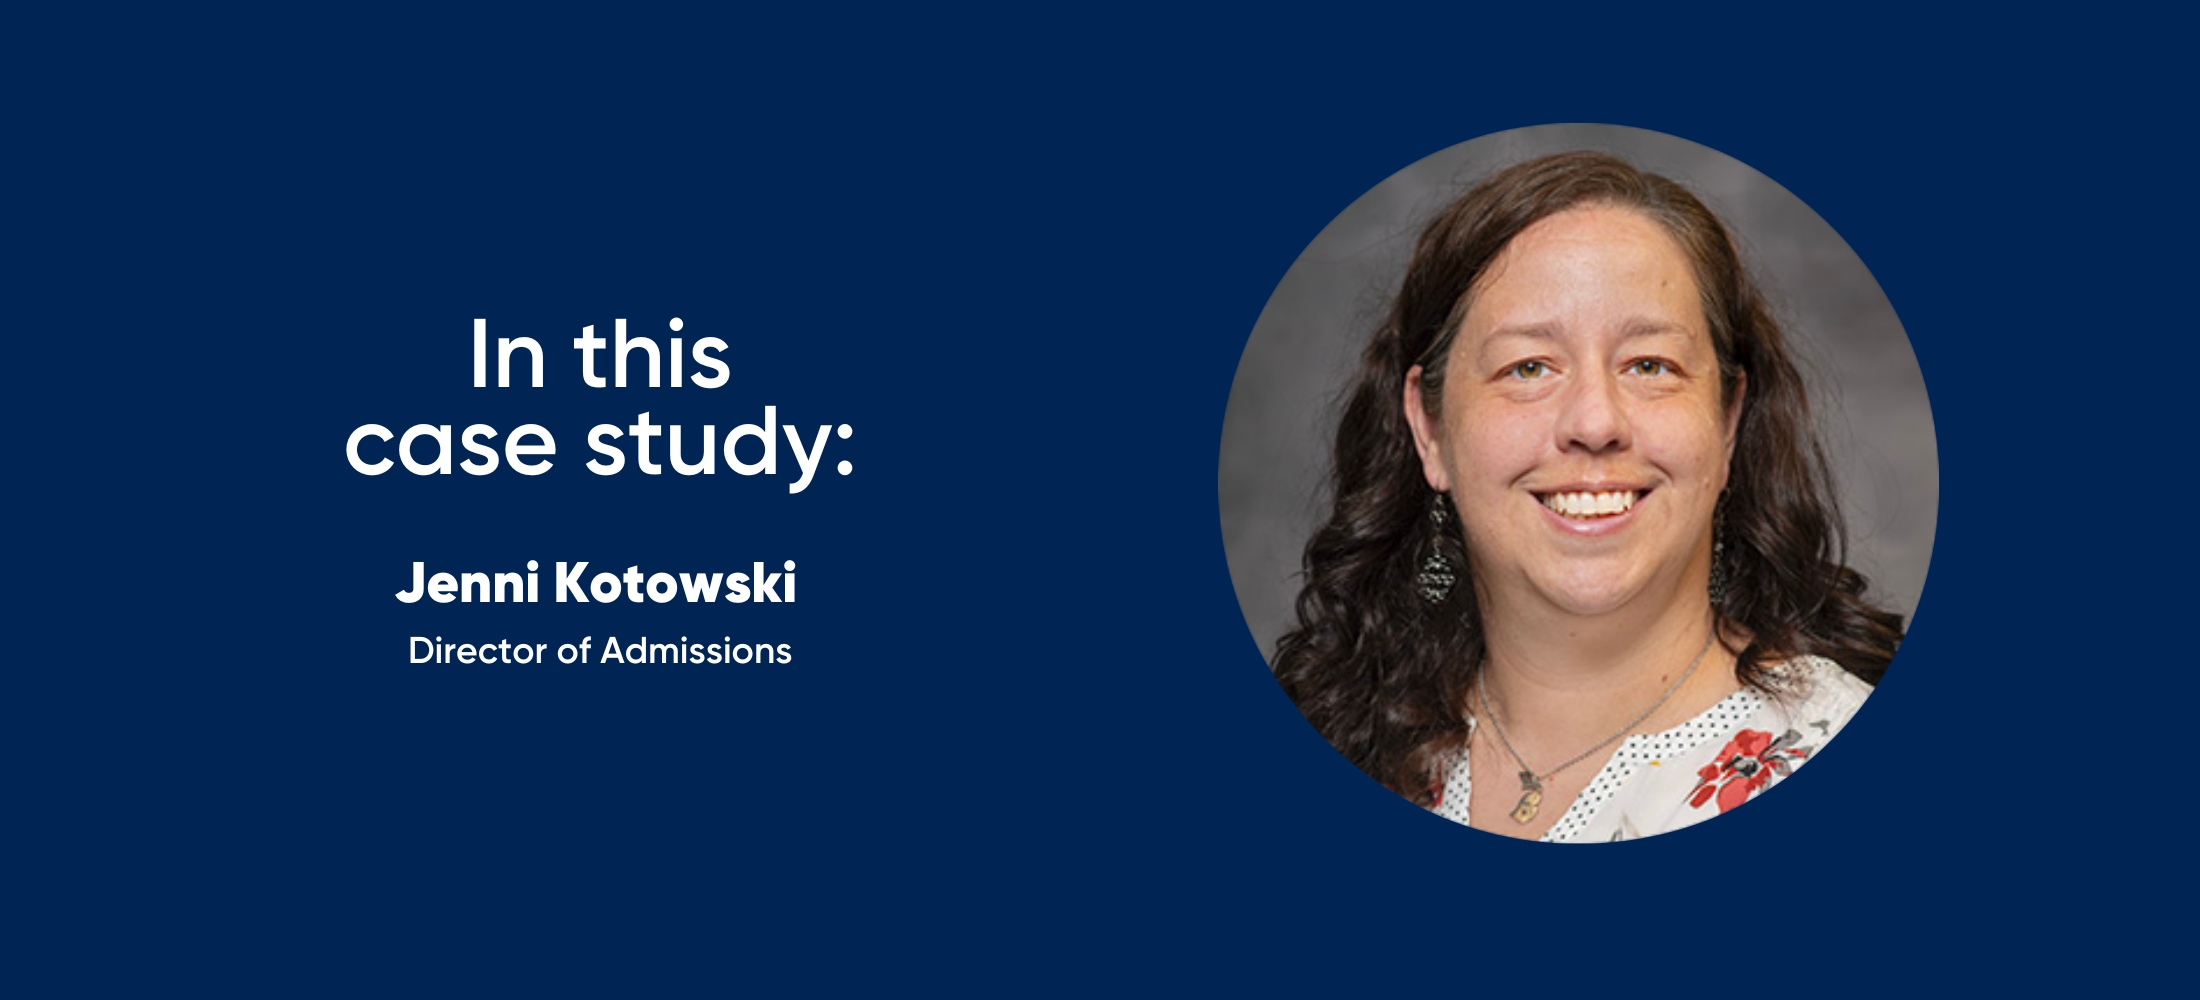 in this case study: Jenni Kotowski, Director of Admissions